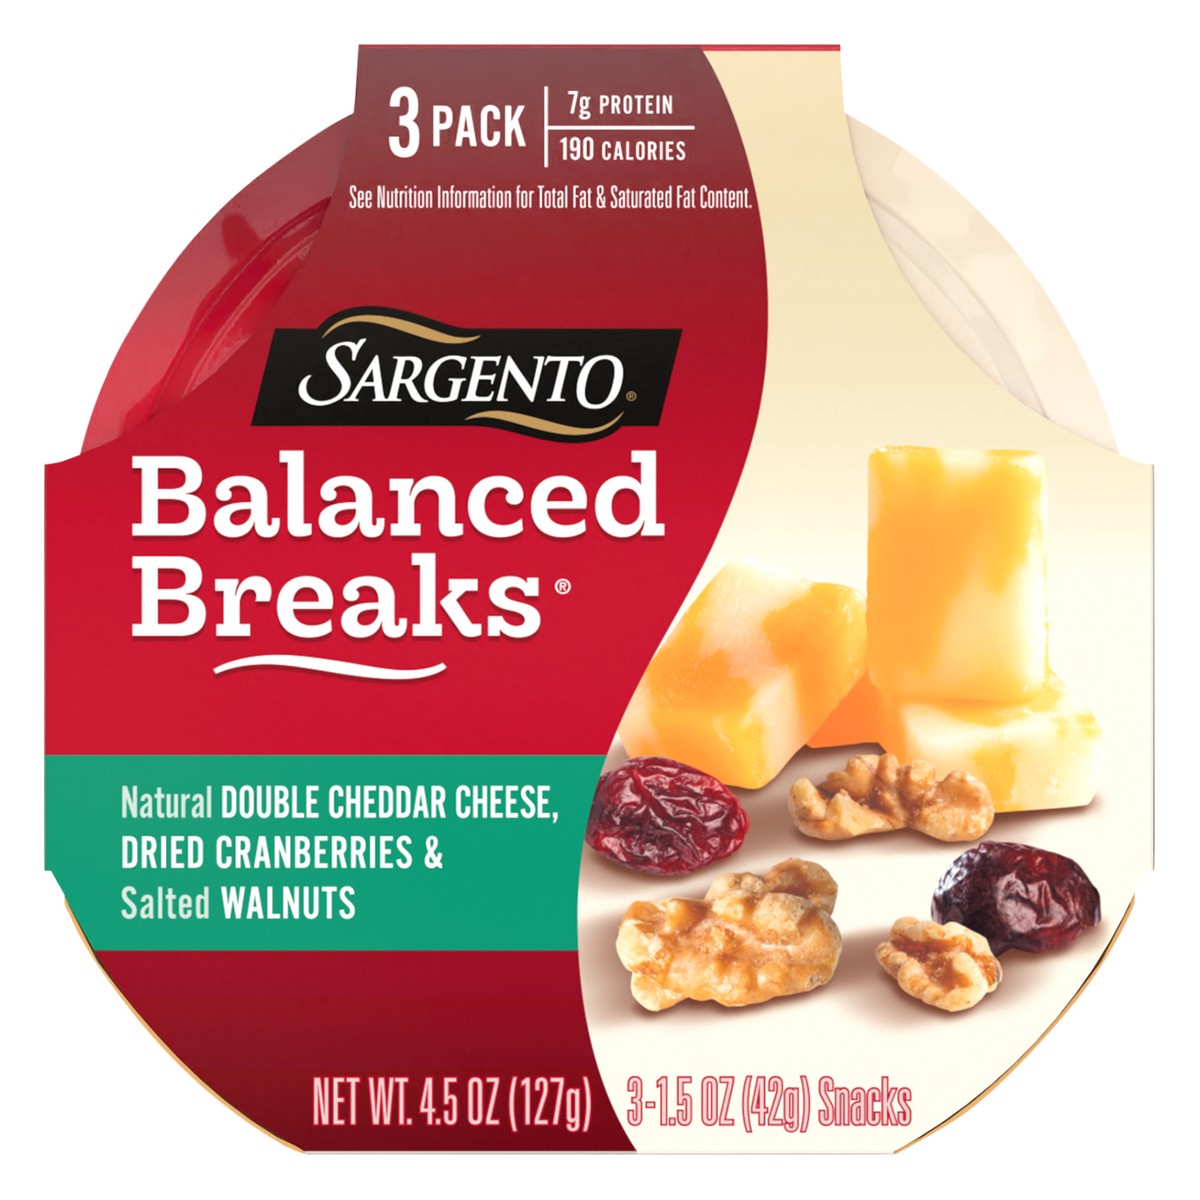 slide 5 of 14, Sargento Balanced Breaks with Natural Double Cheddar Cheese, Dried Cranberries and Salted Walnuts, 1.5 oz., 3-Pack, 4.5 oz